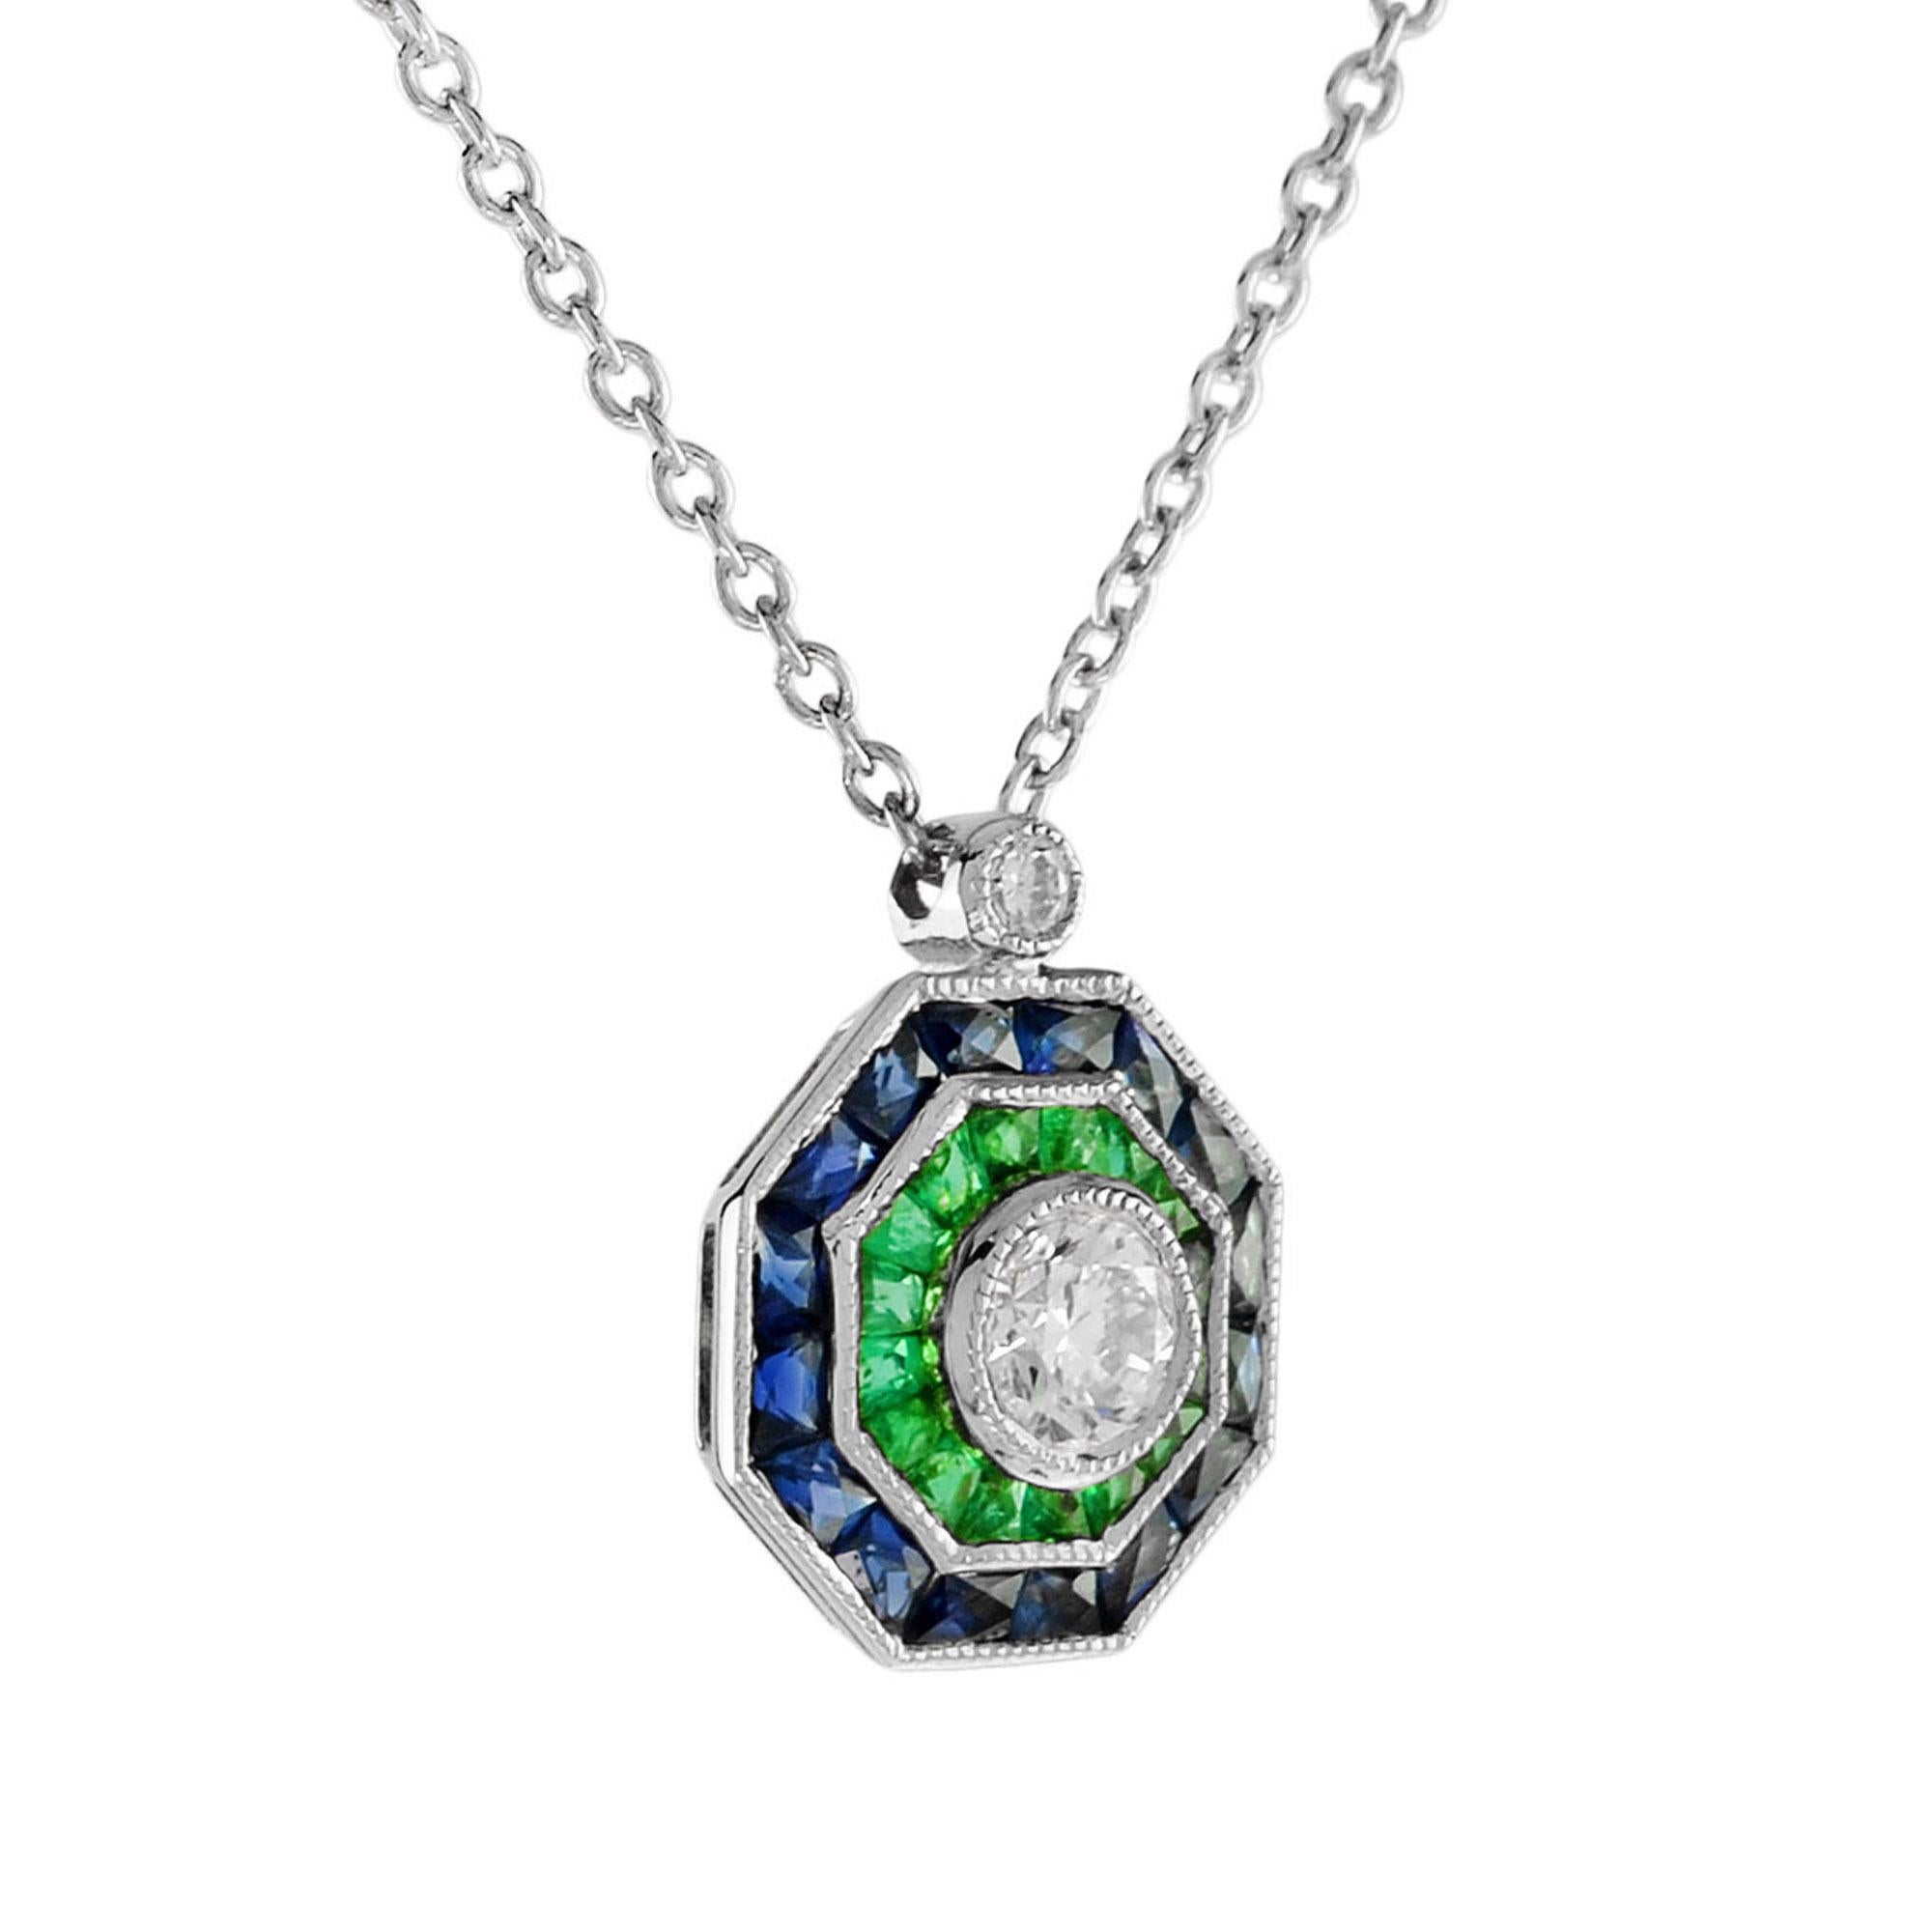 A glamorous Art Deco inspired target cluster pendant necklace bezel set with stunning a brilliant cut diamond, framed in an octagonal border of French cut emeralds and further sapphires which case around the edge. 

Information
Style: Art